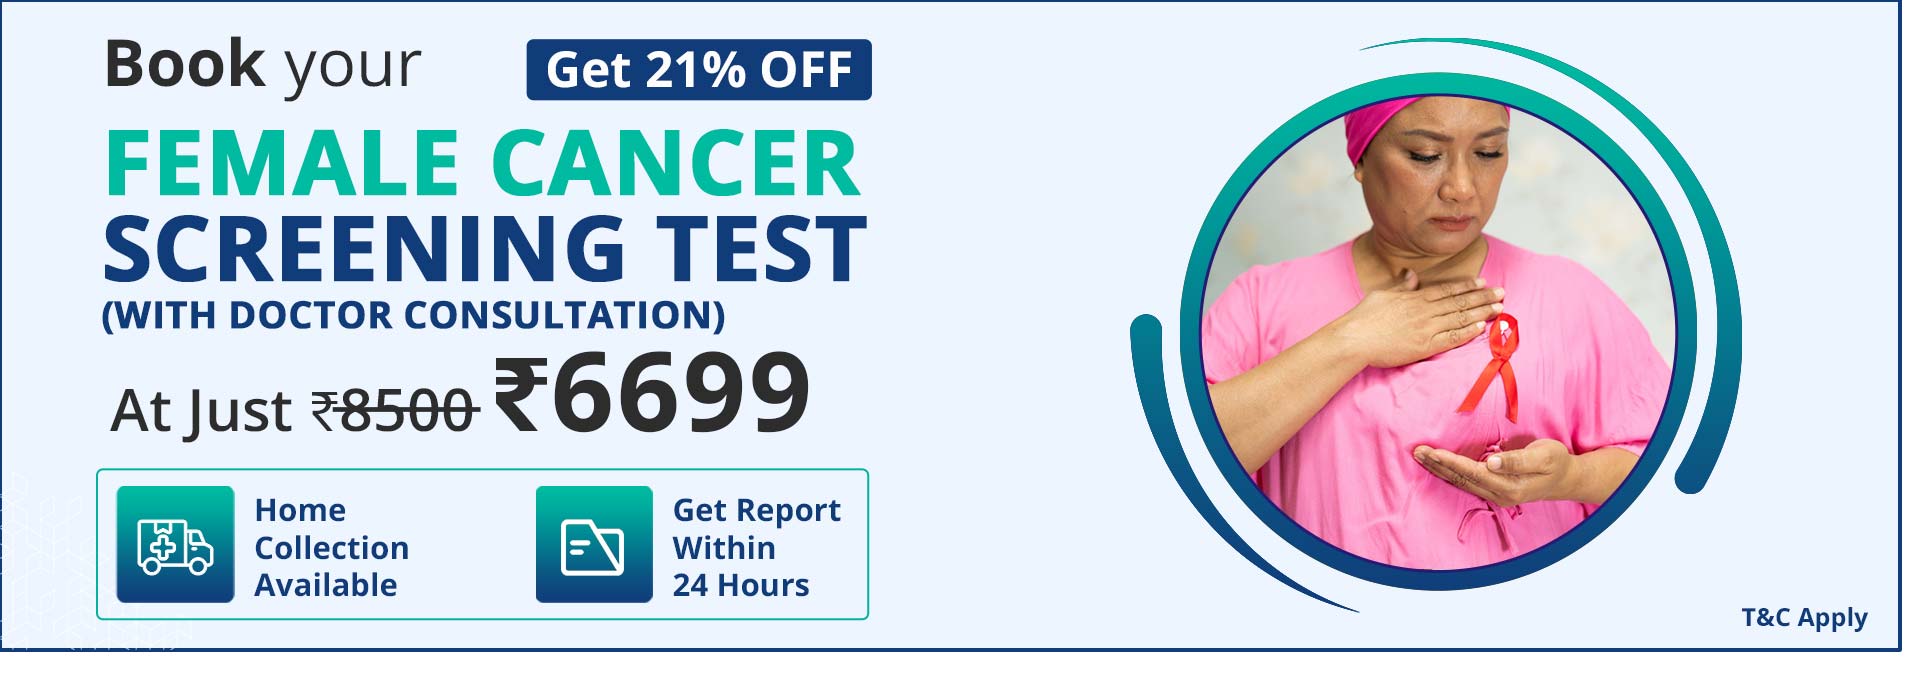 Female Cancer Screening Test With Doctor Consultation